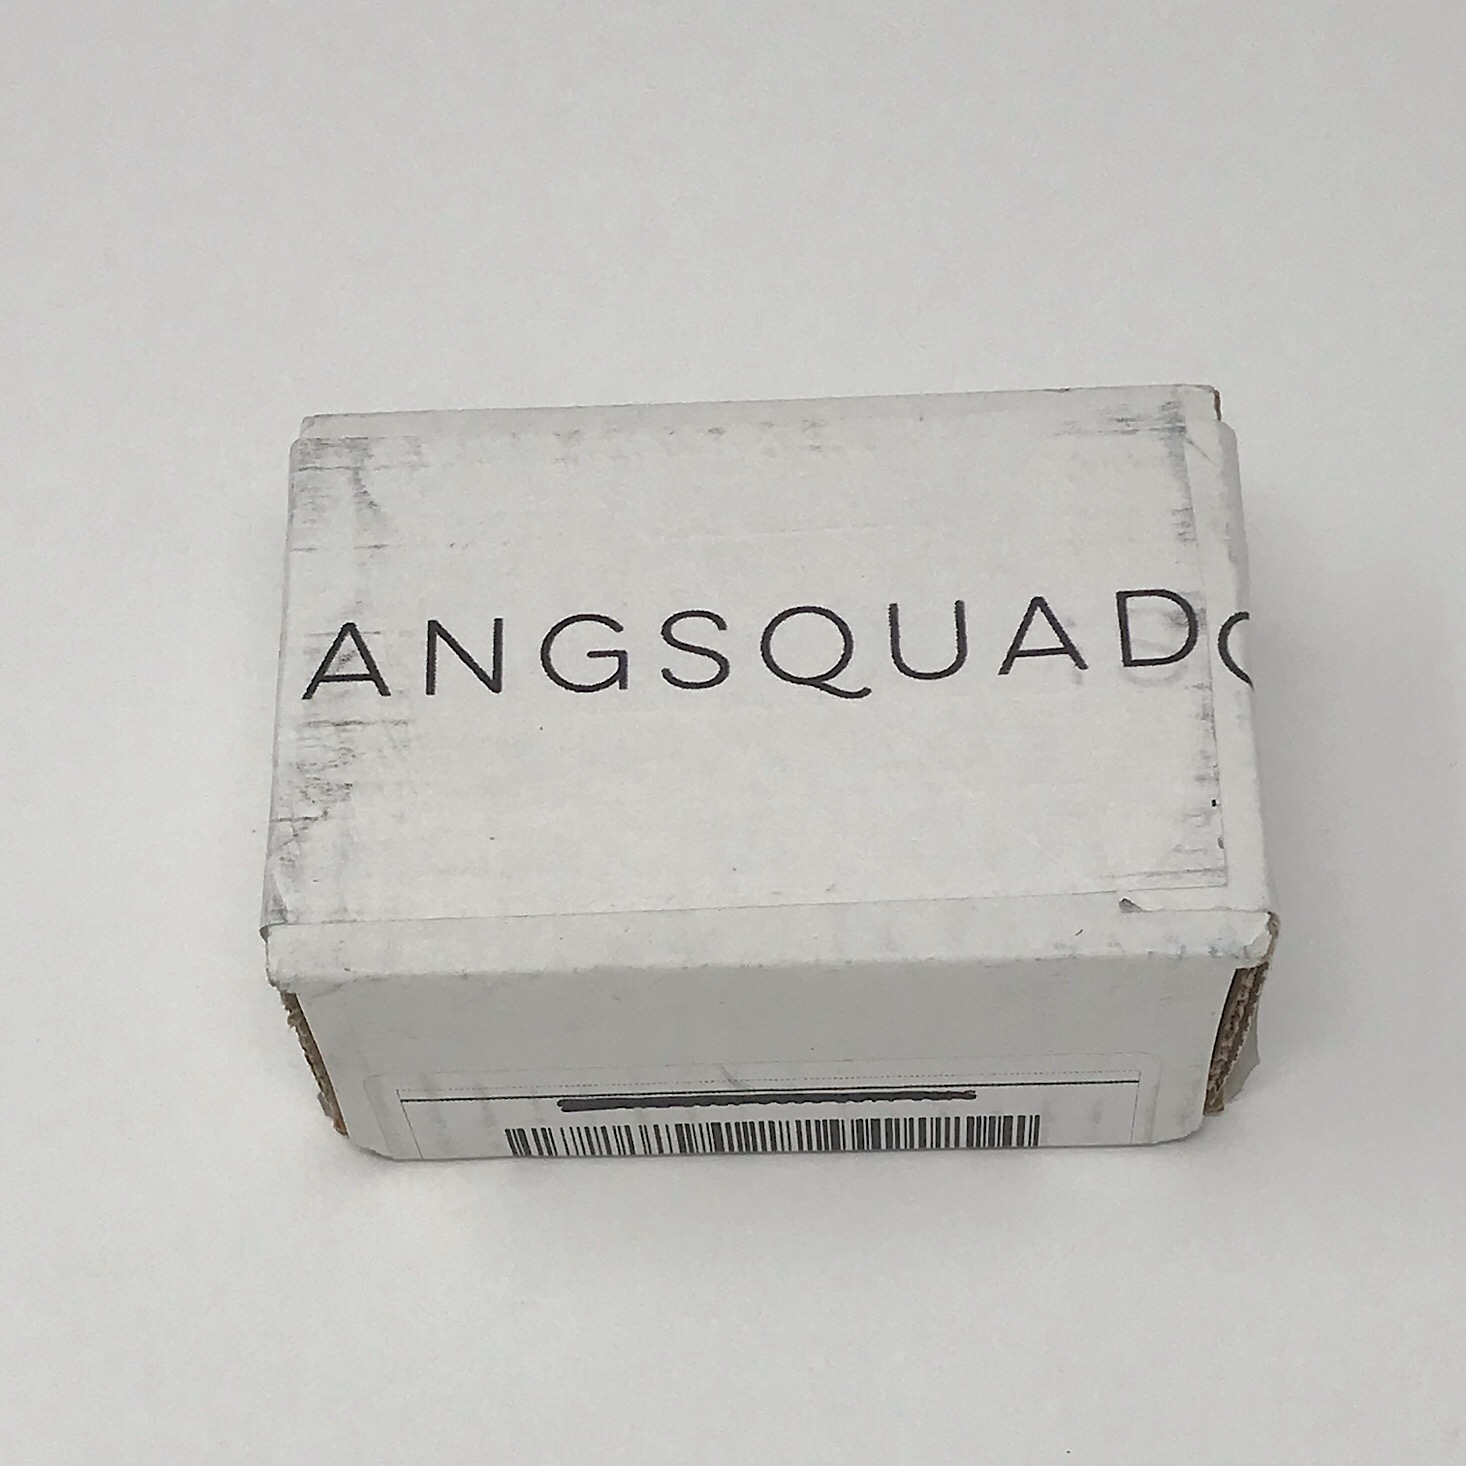 HangSquad Earring Subscription Review + Coupon – November 2018